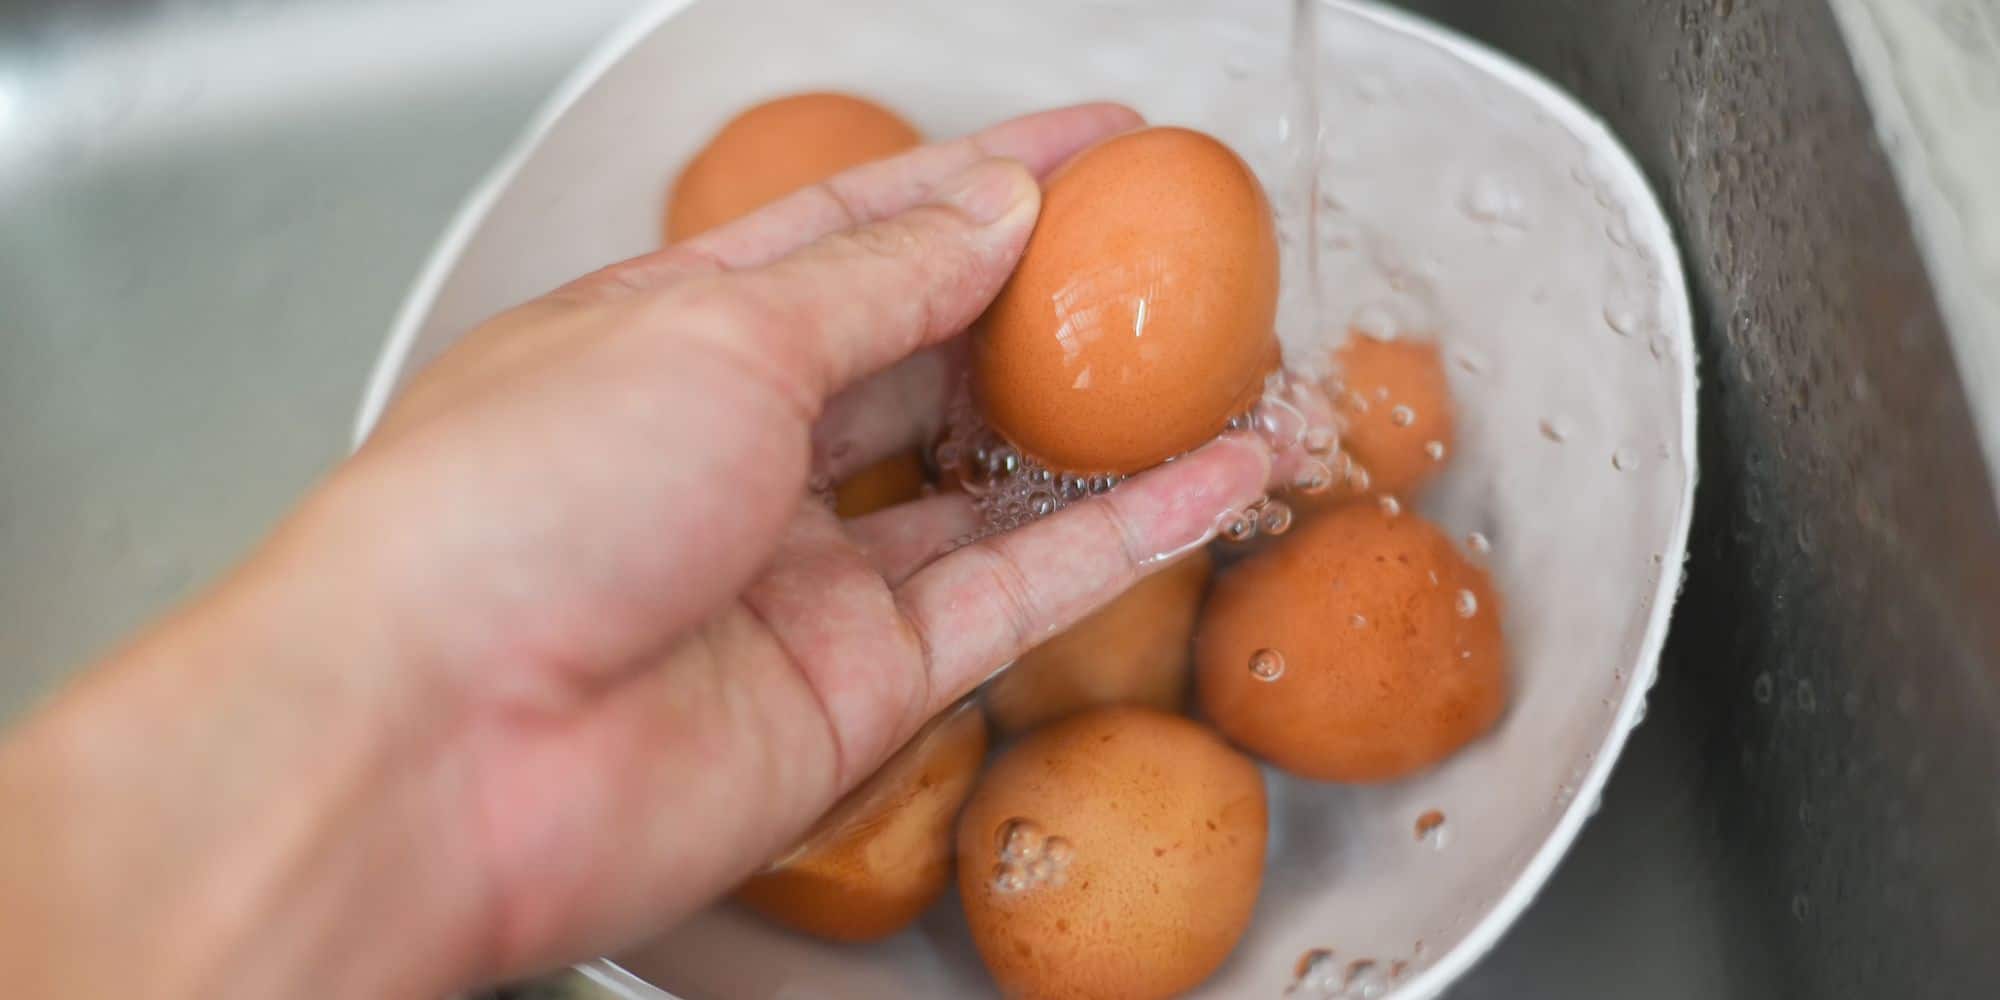 Washing eggs in a bowl of water